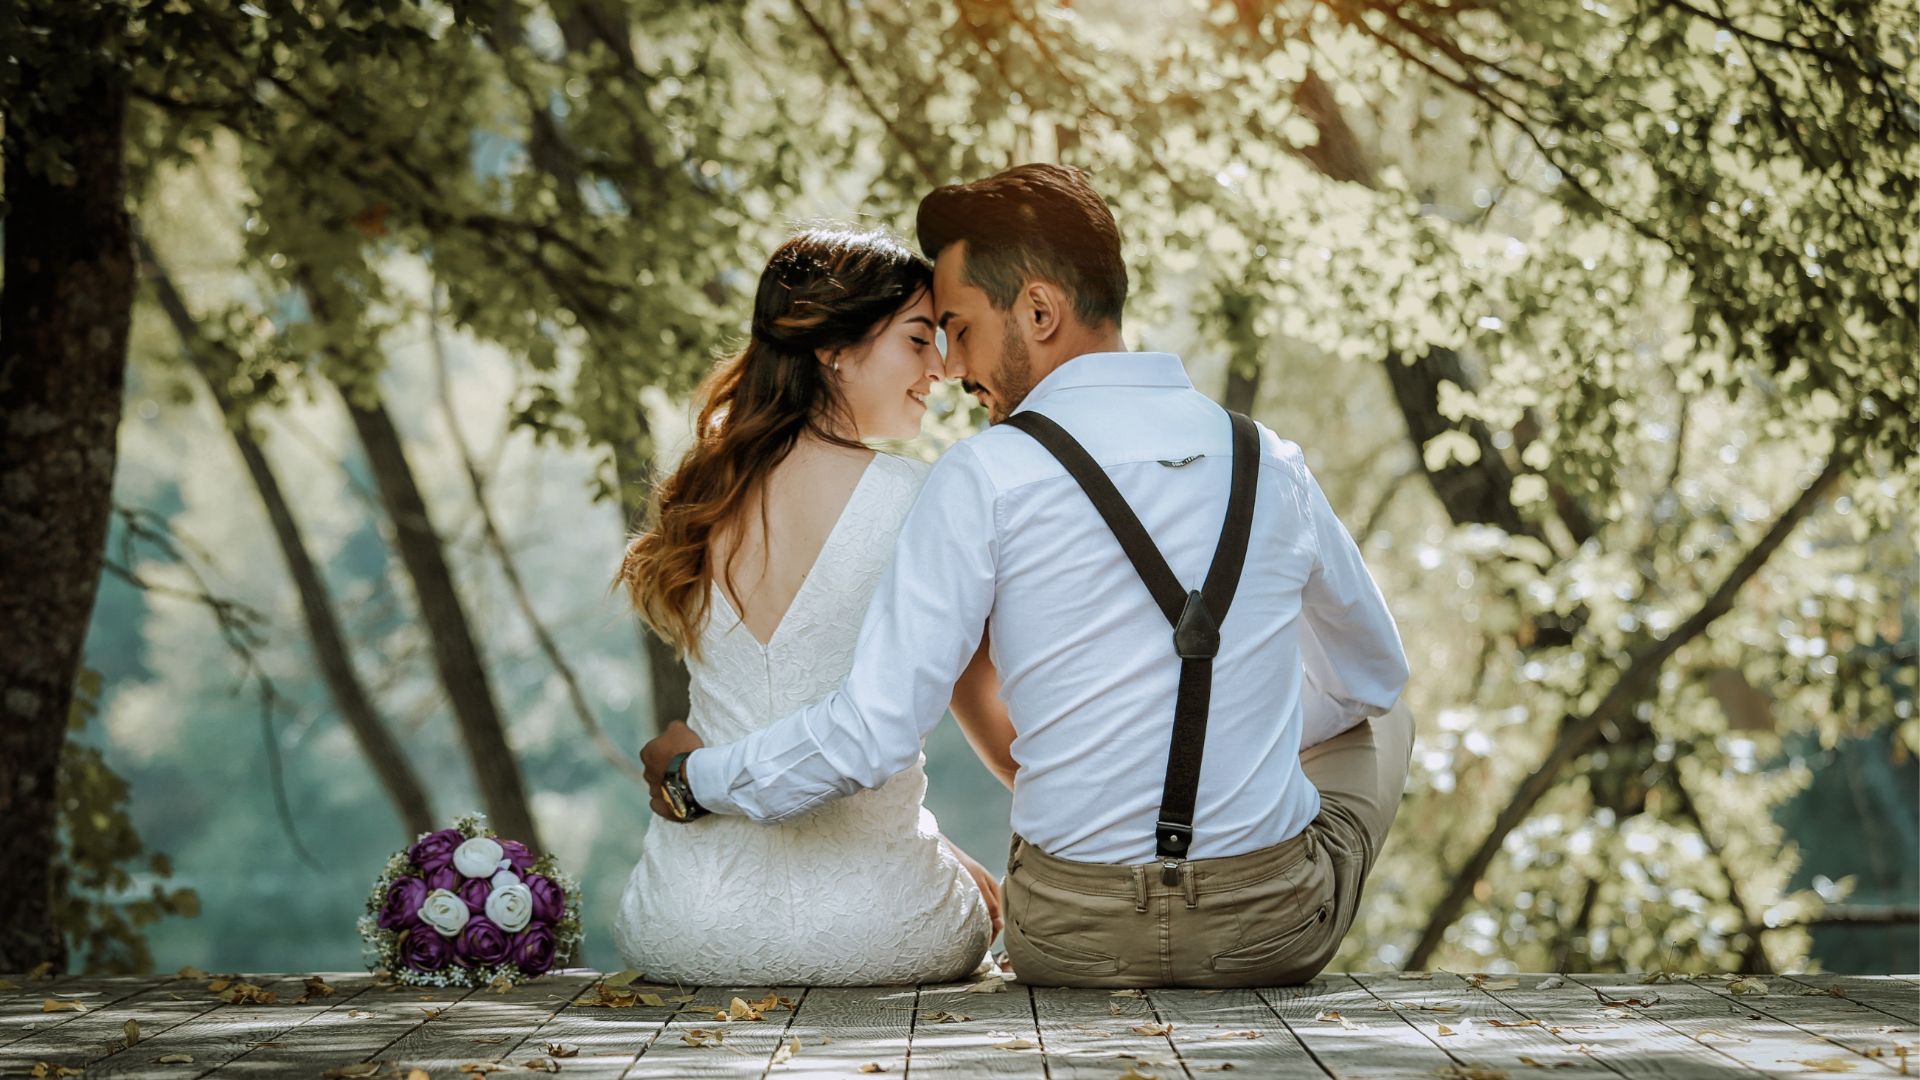 On The Rise: Simple, Authentic Natural Weddings Wild Heart Films Wedding Videography